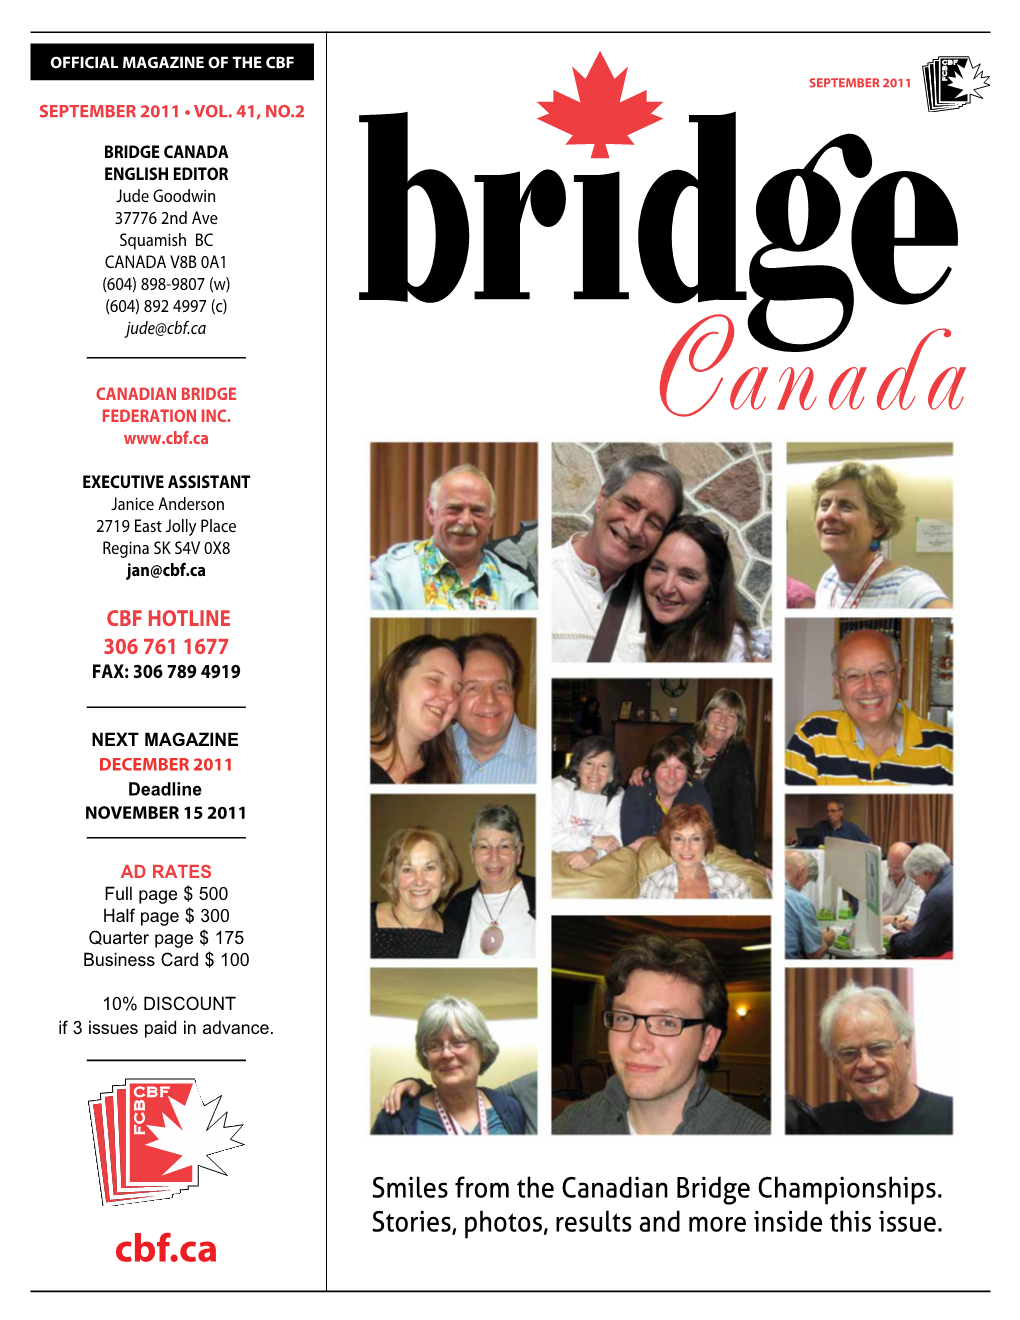 Smiles from the Canadian Bridge Championships. Stories, Photos, Results and More Inside This Issue